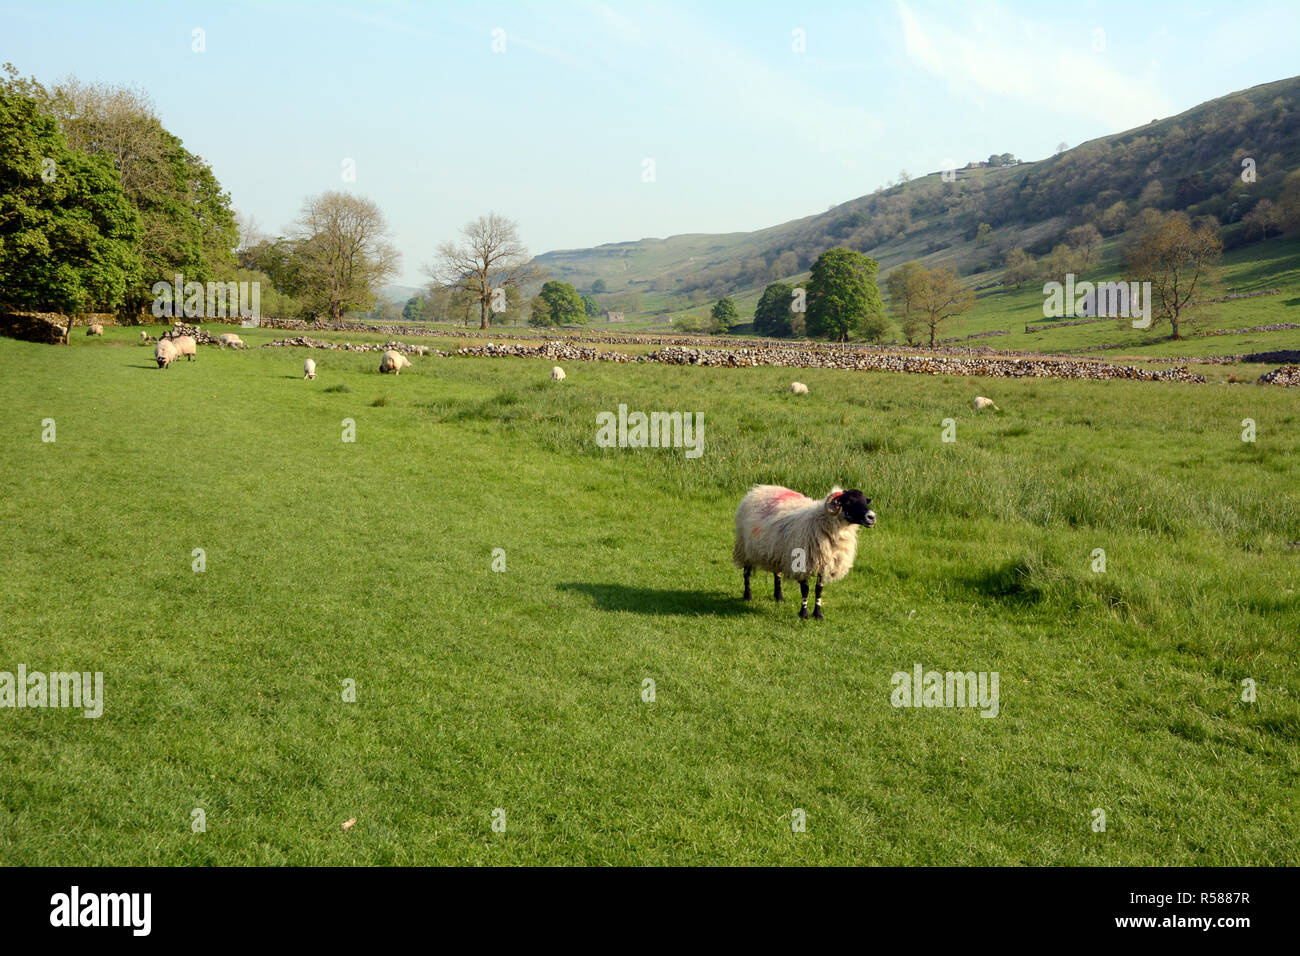 Sheep grazing in a meadow along the Dales Way hiking trail in the Wharfe River Valley, near Starbotton, Yorkshire, Northern England, Great Britain. Stock Photo